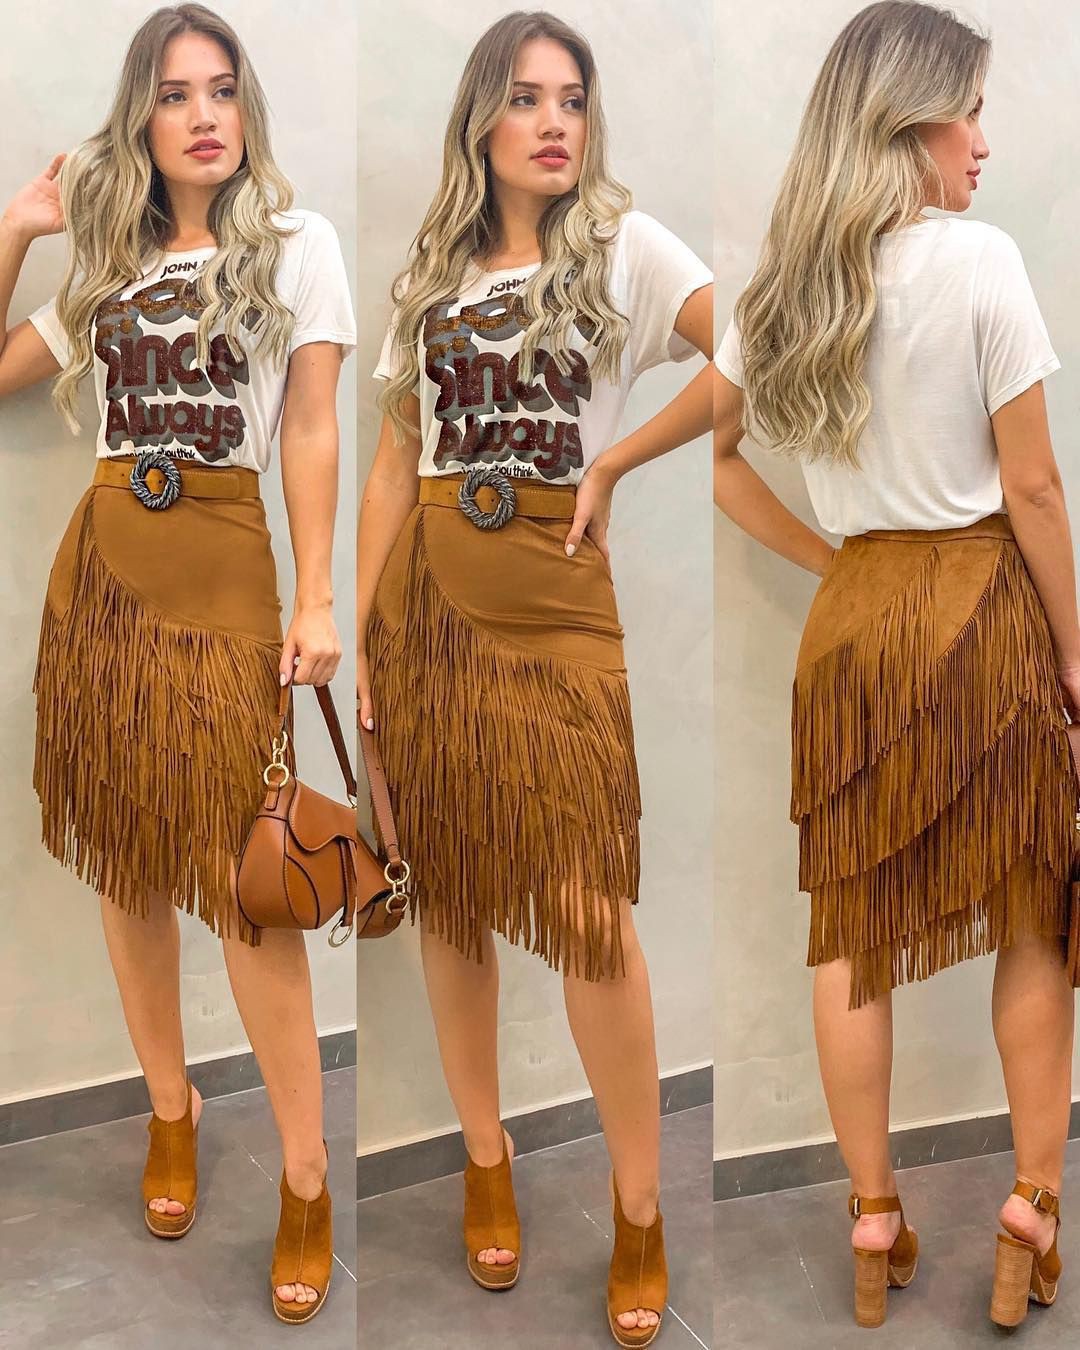 Beige and brown outfit with miniskirt, skirt: Fashion photography,  fashion model,  Beige And Brown Outfit,  Fringe Skirts  